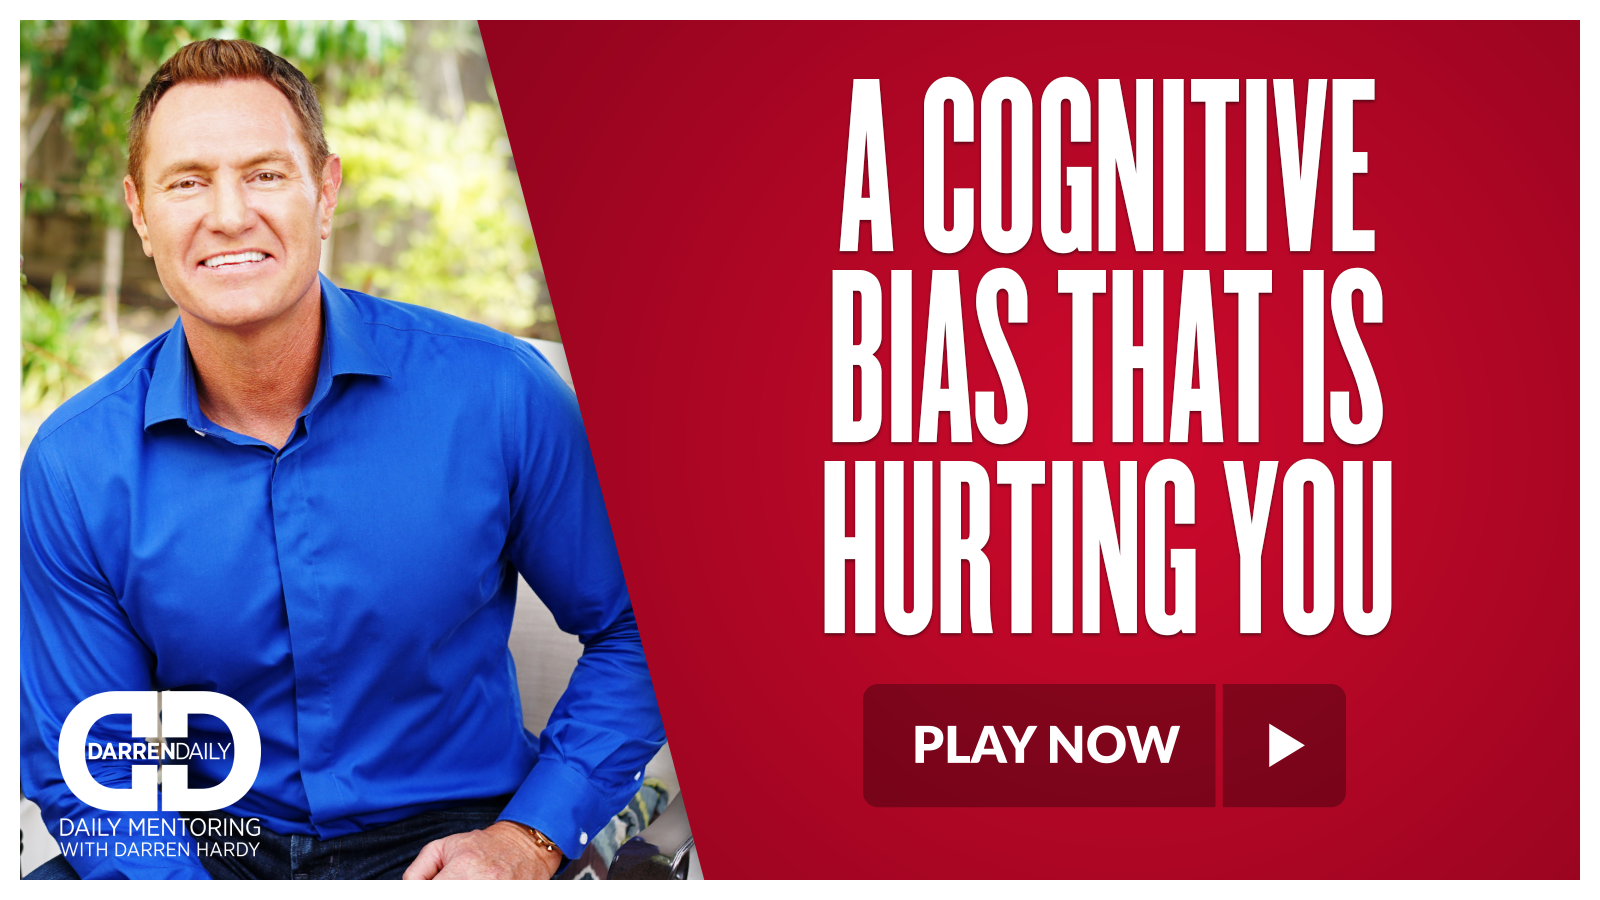 A Cognitive Bias That Is Hurting You